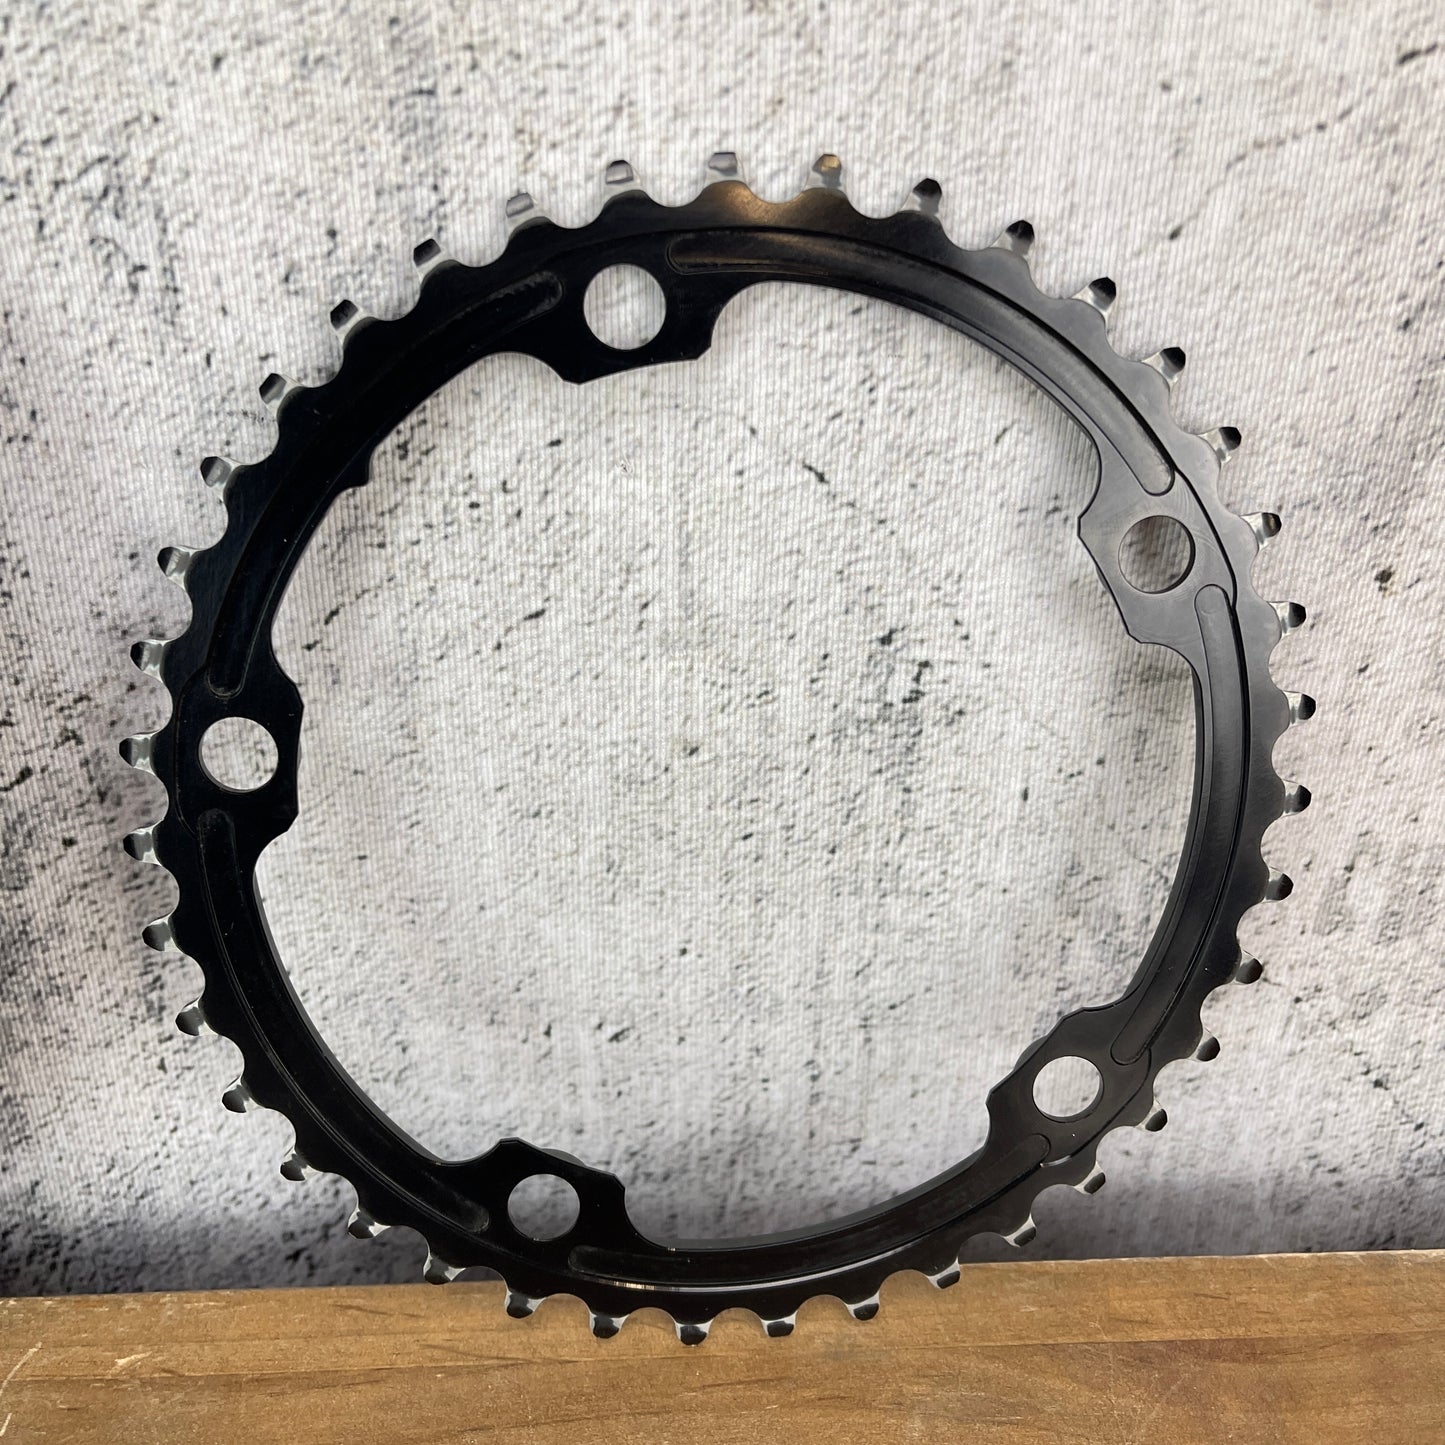 Absolute Black Oval 53/39t 130BCD Road Bike Chainring Set 5-Bolt